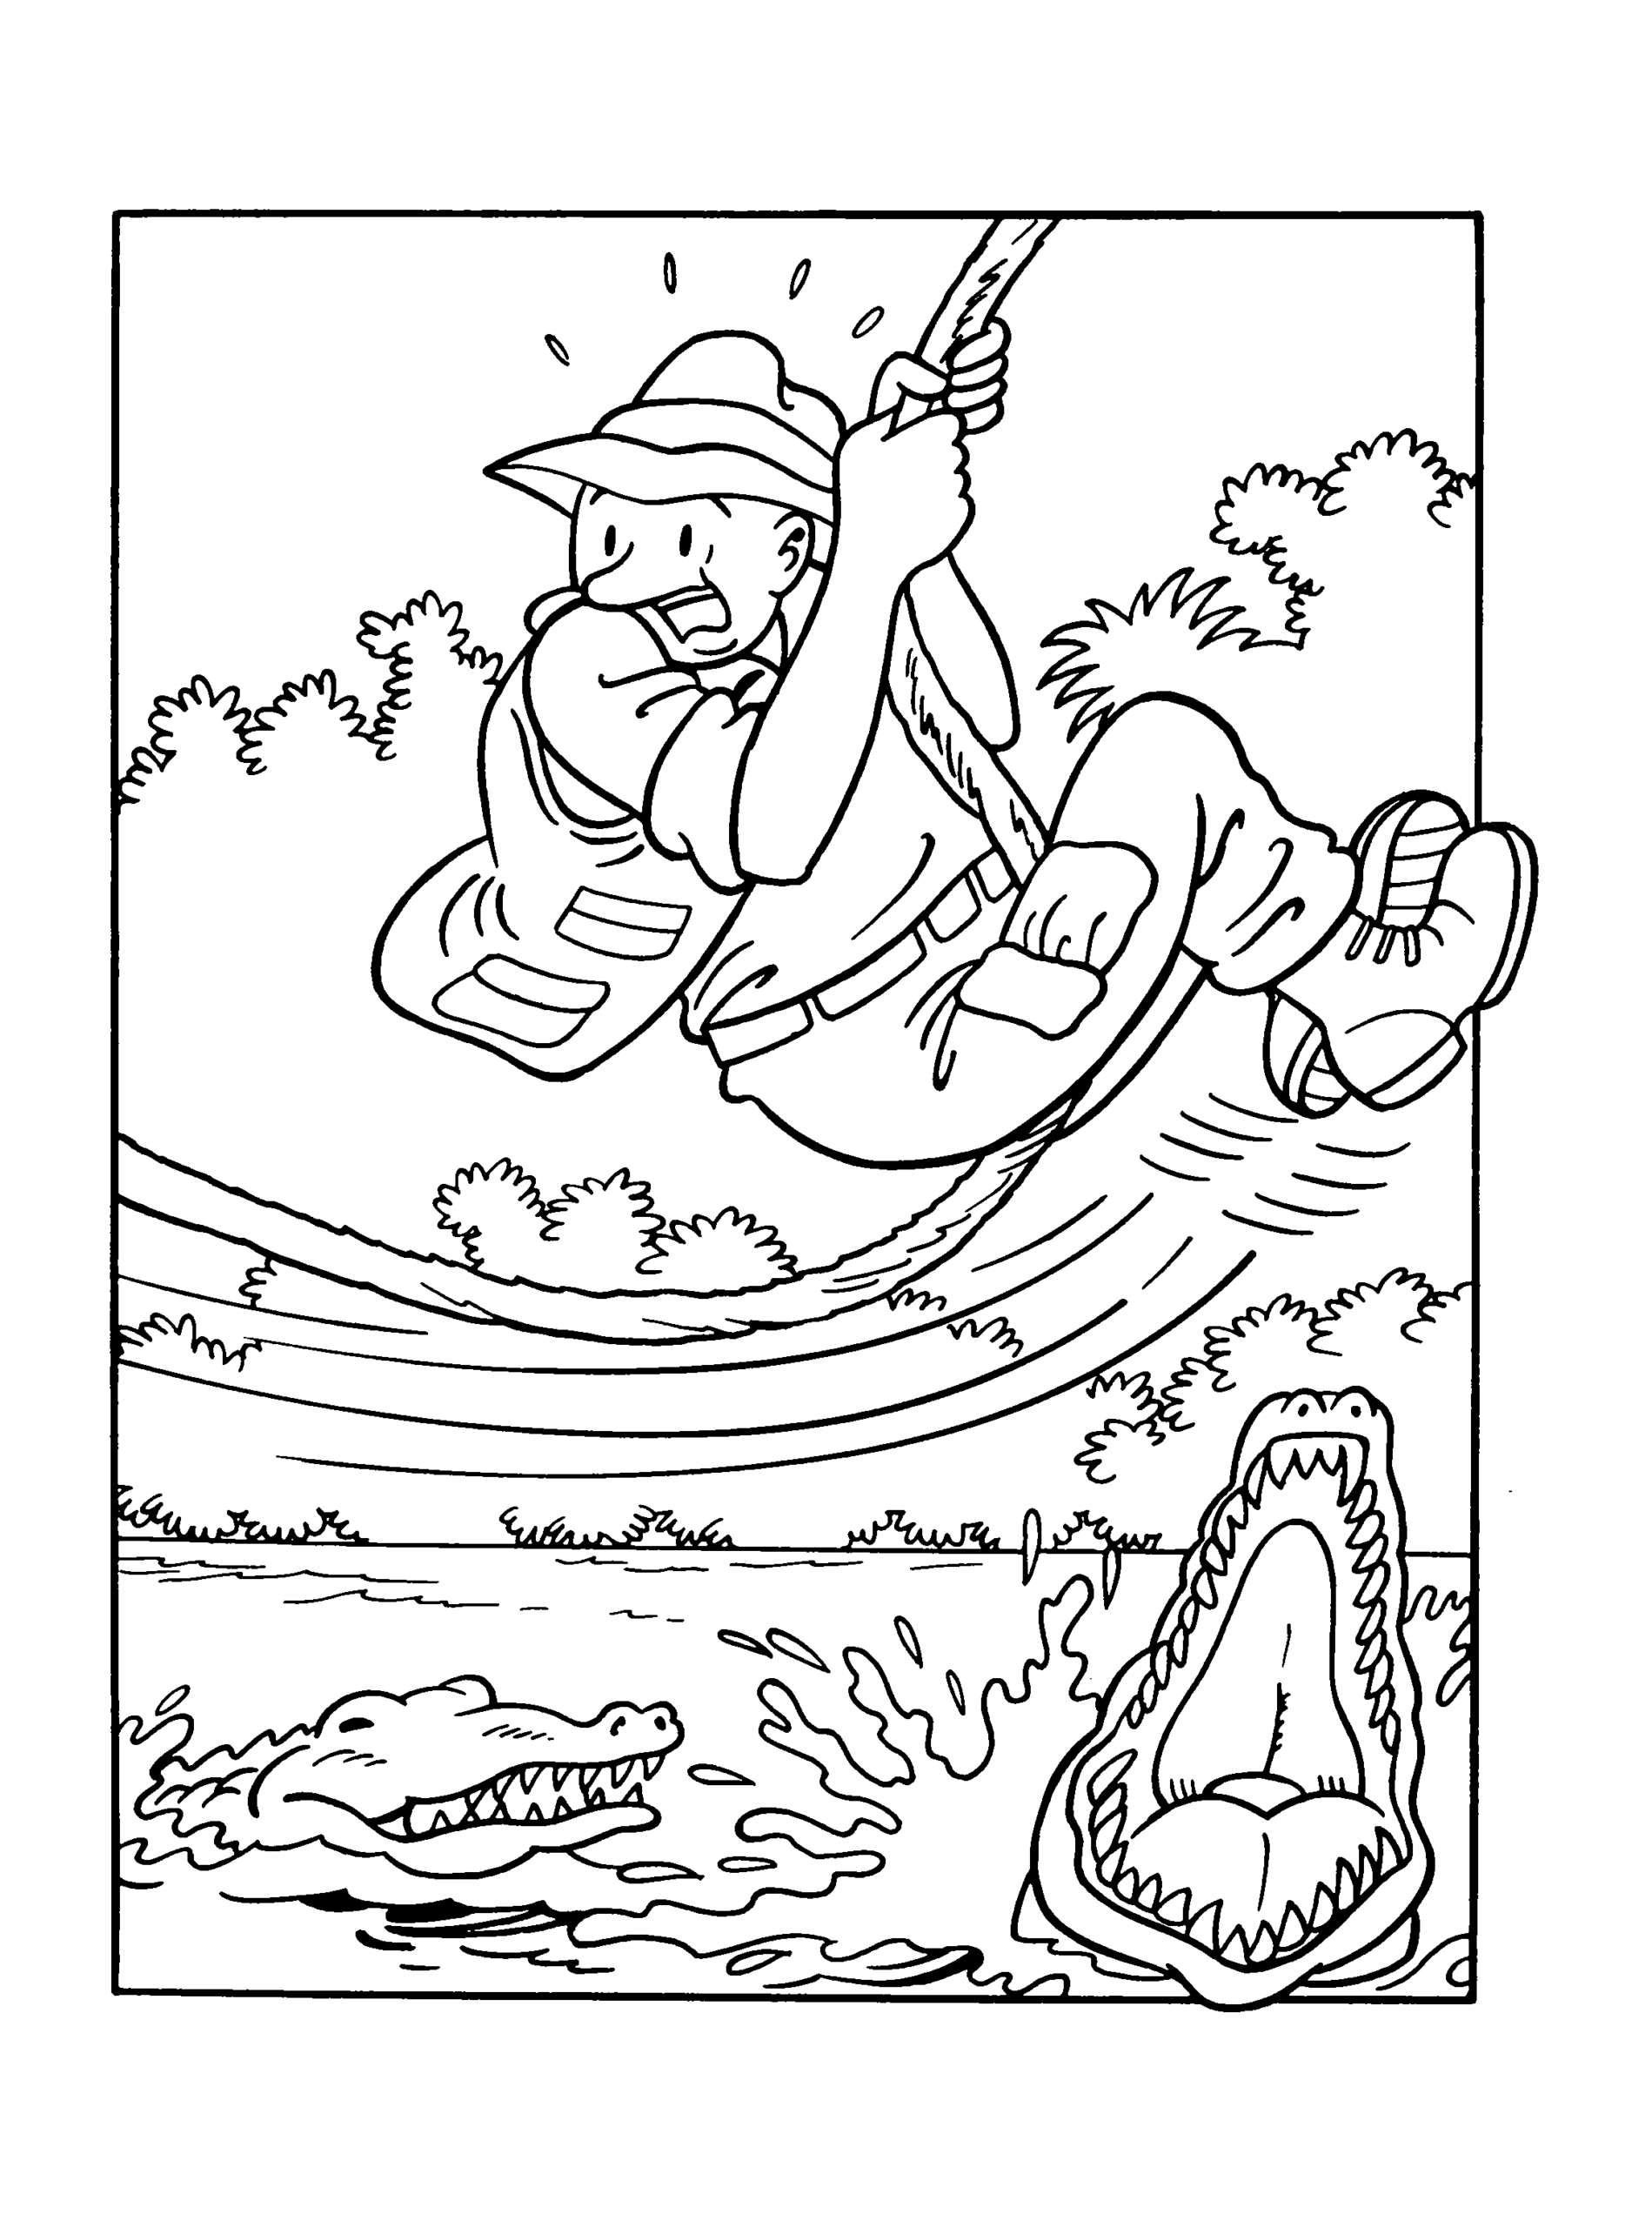 Spike and Suzy Coloring Pages Cartoons spike and suzy 44 Printable 2020 5931 Coloring4free